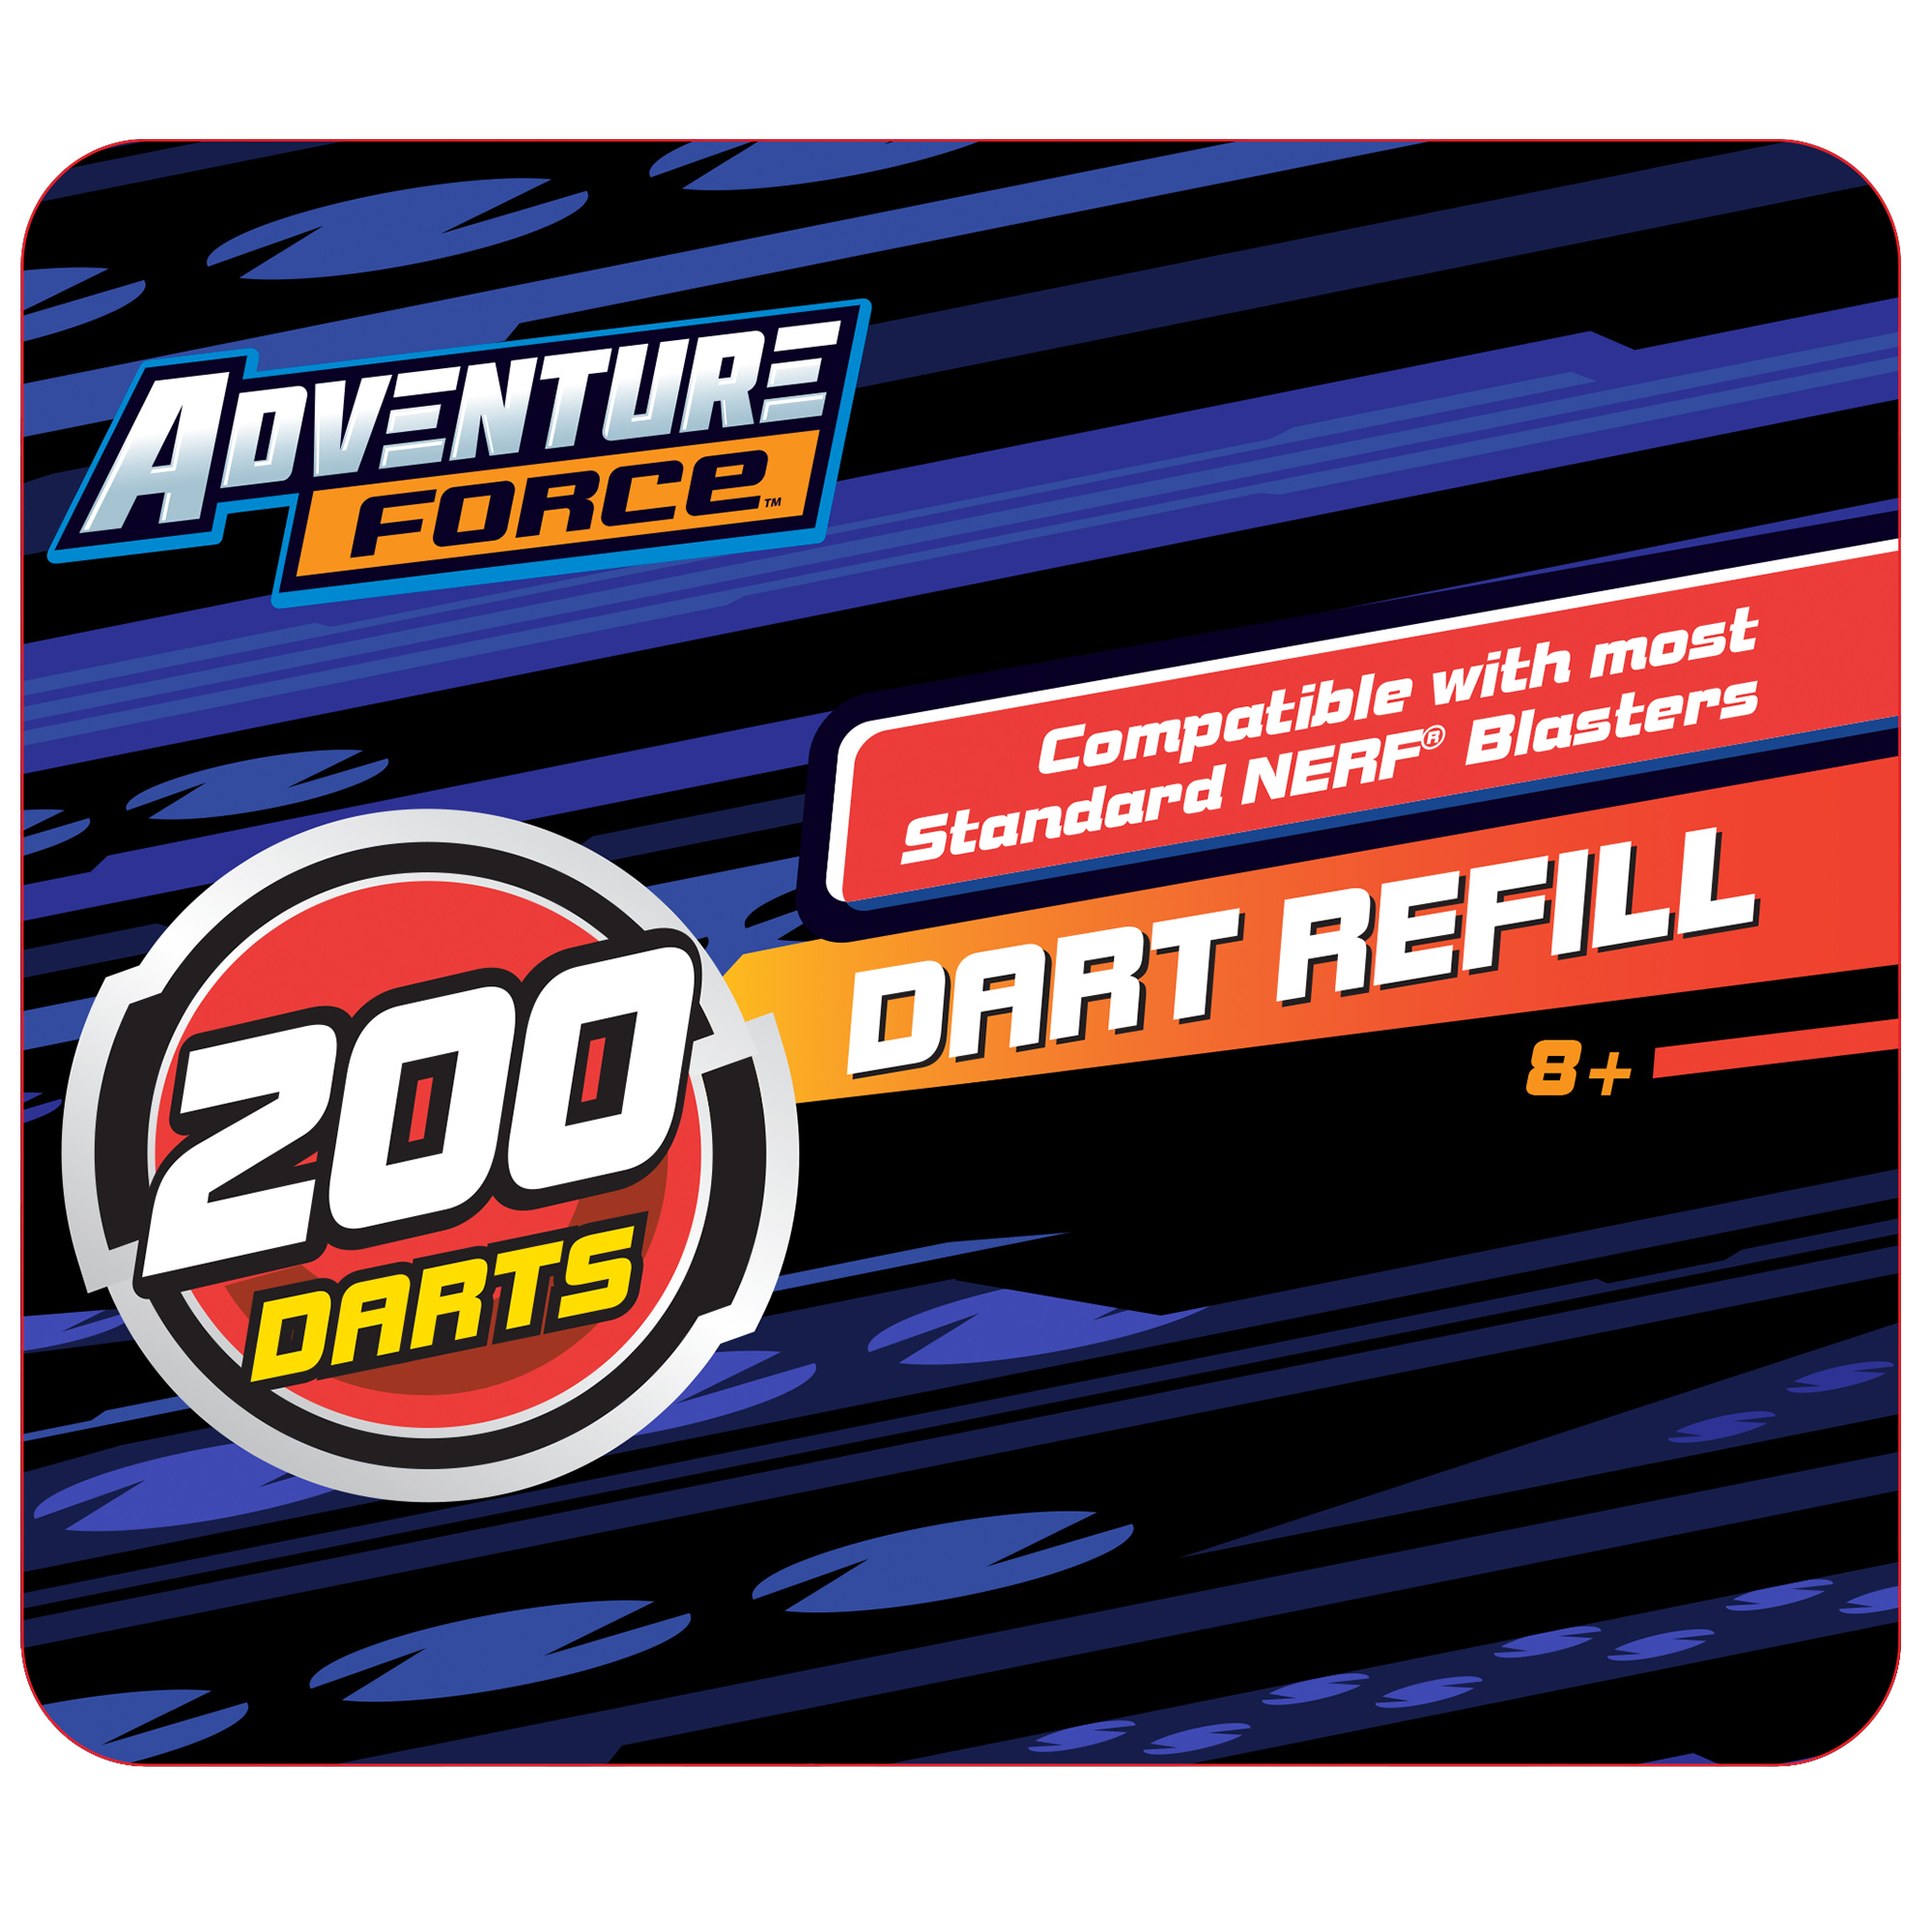 Adventure Force 200-Dart Refill - Compatible with Standard Nerf Elite Blasters - image 5 of 8